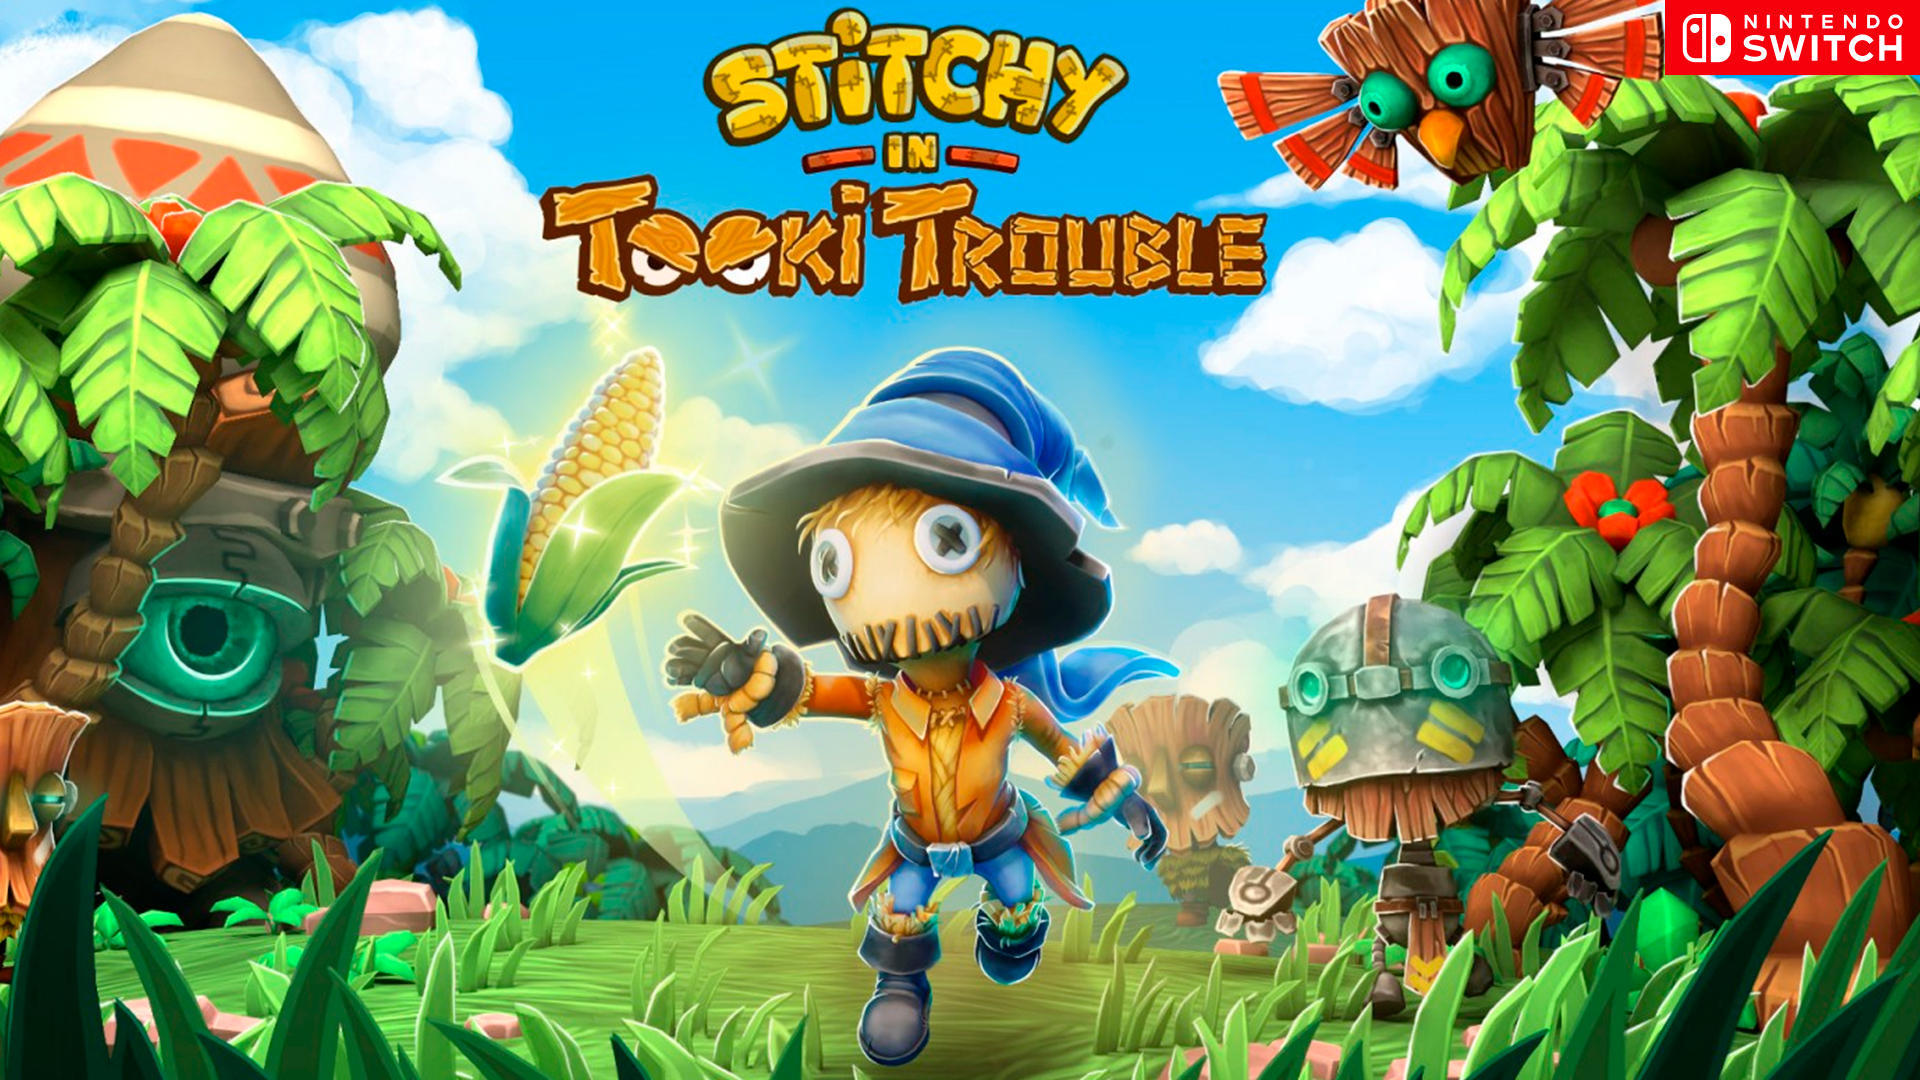 Stitchy in Tooki Trouble